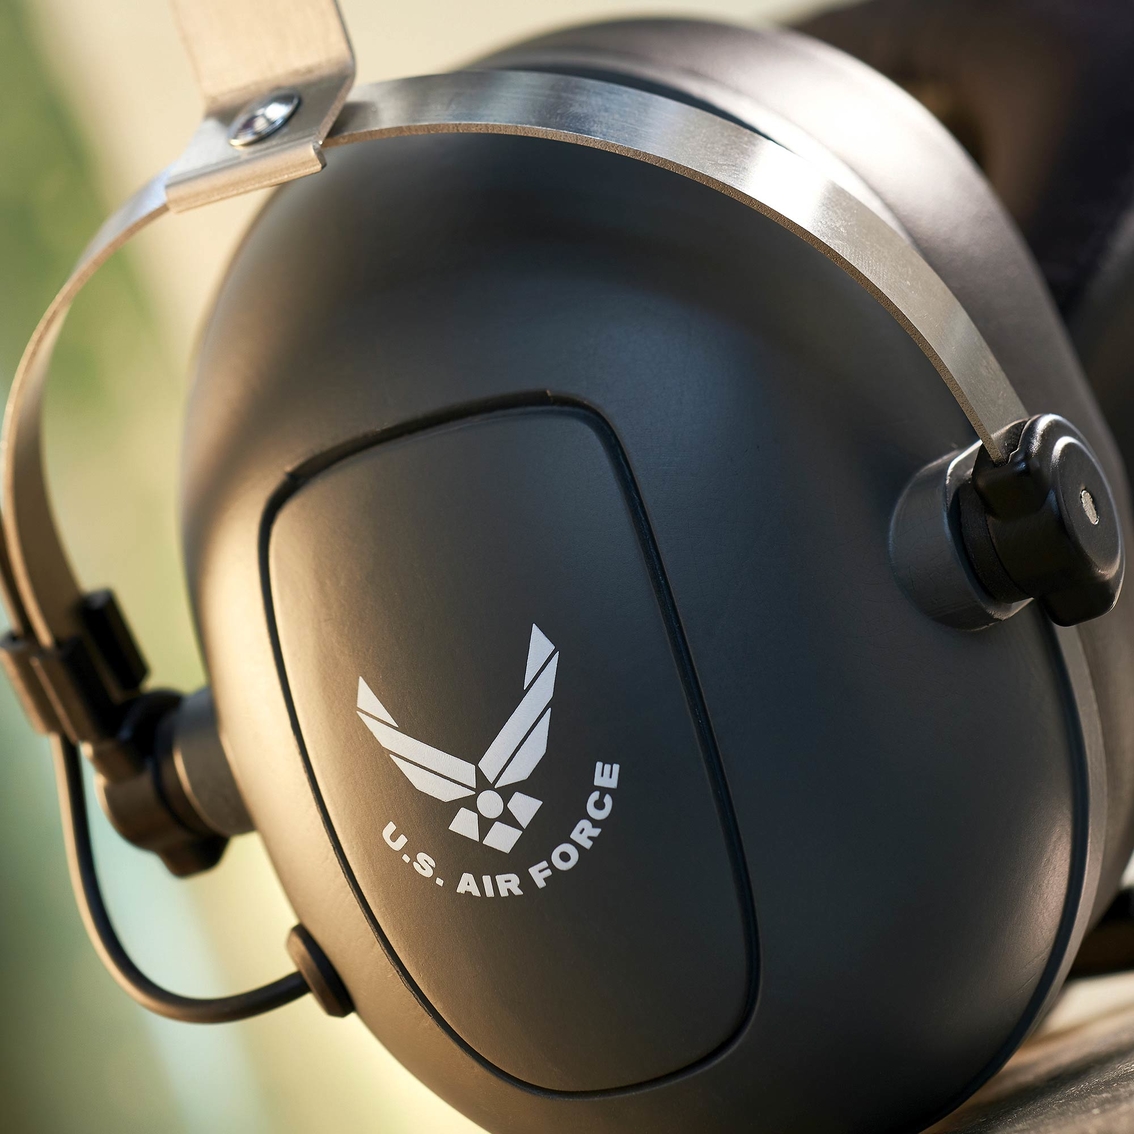 Thrustmaster T.Flight Gaming Headset (US Air Force Edition) - Image 9 of 10